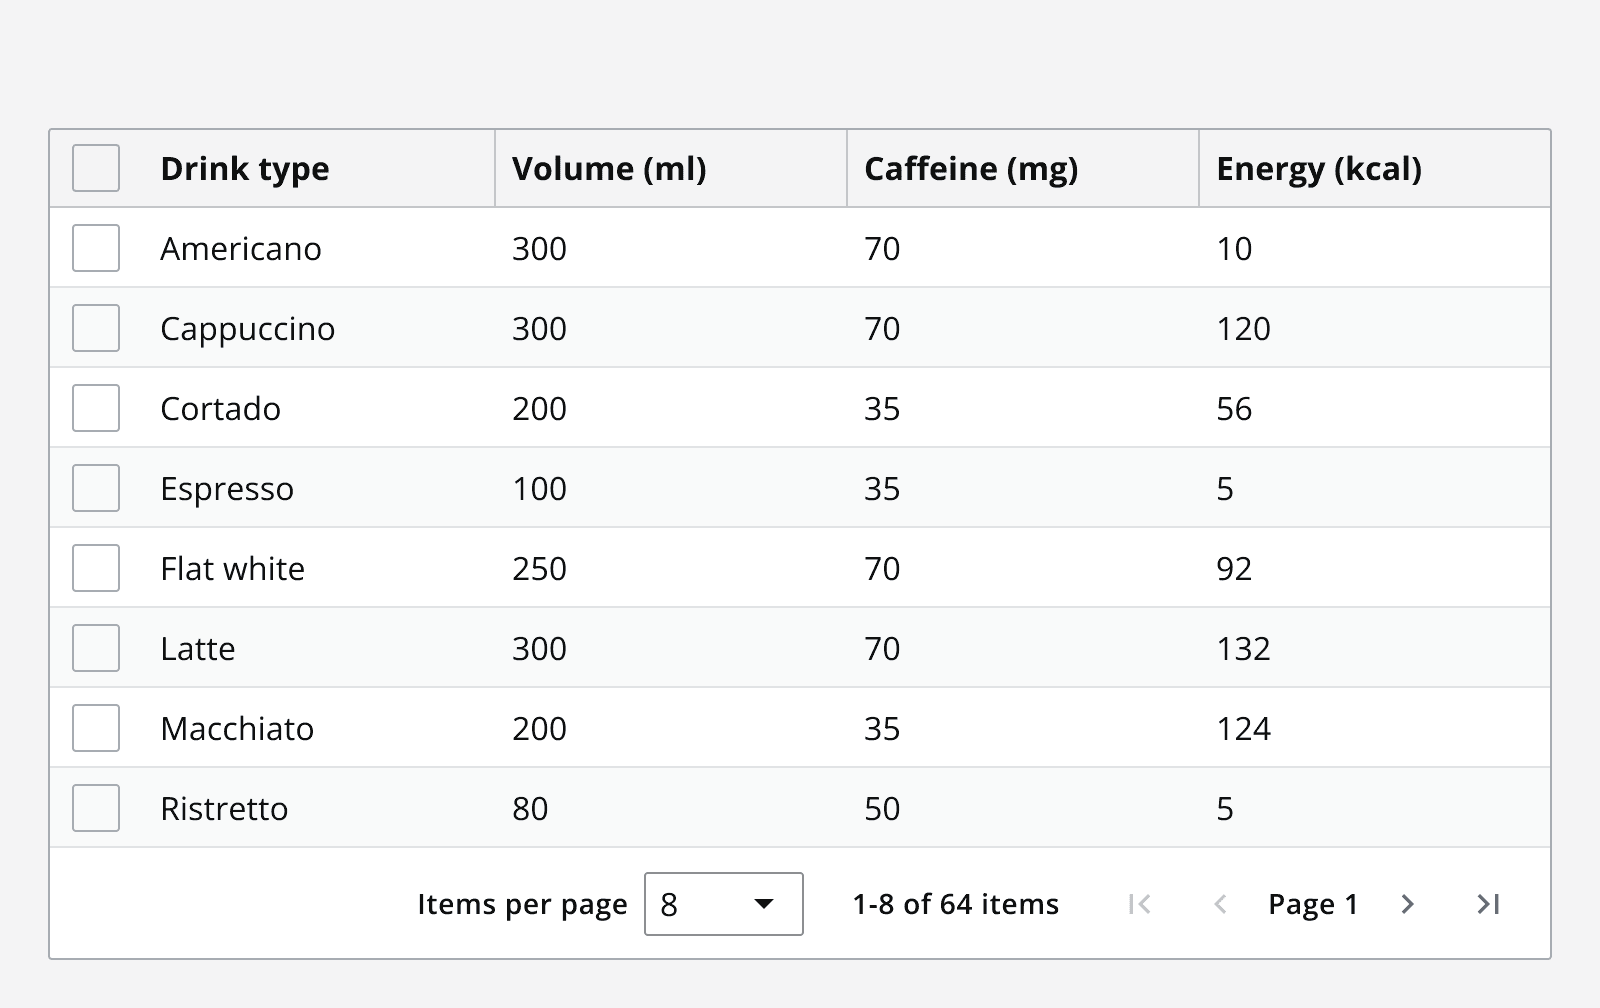 An example nutritional data table for coffee products. Coffee products are displayed in a table and a pagination bar allows the number of items per page to be changed, displays the total number of items, and includes a simple pagination control allowing navigation through the pages.